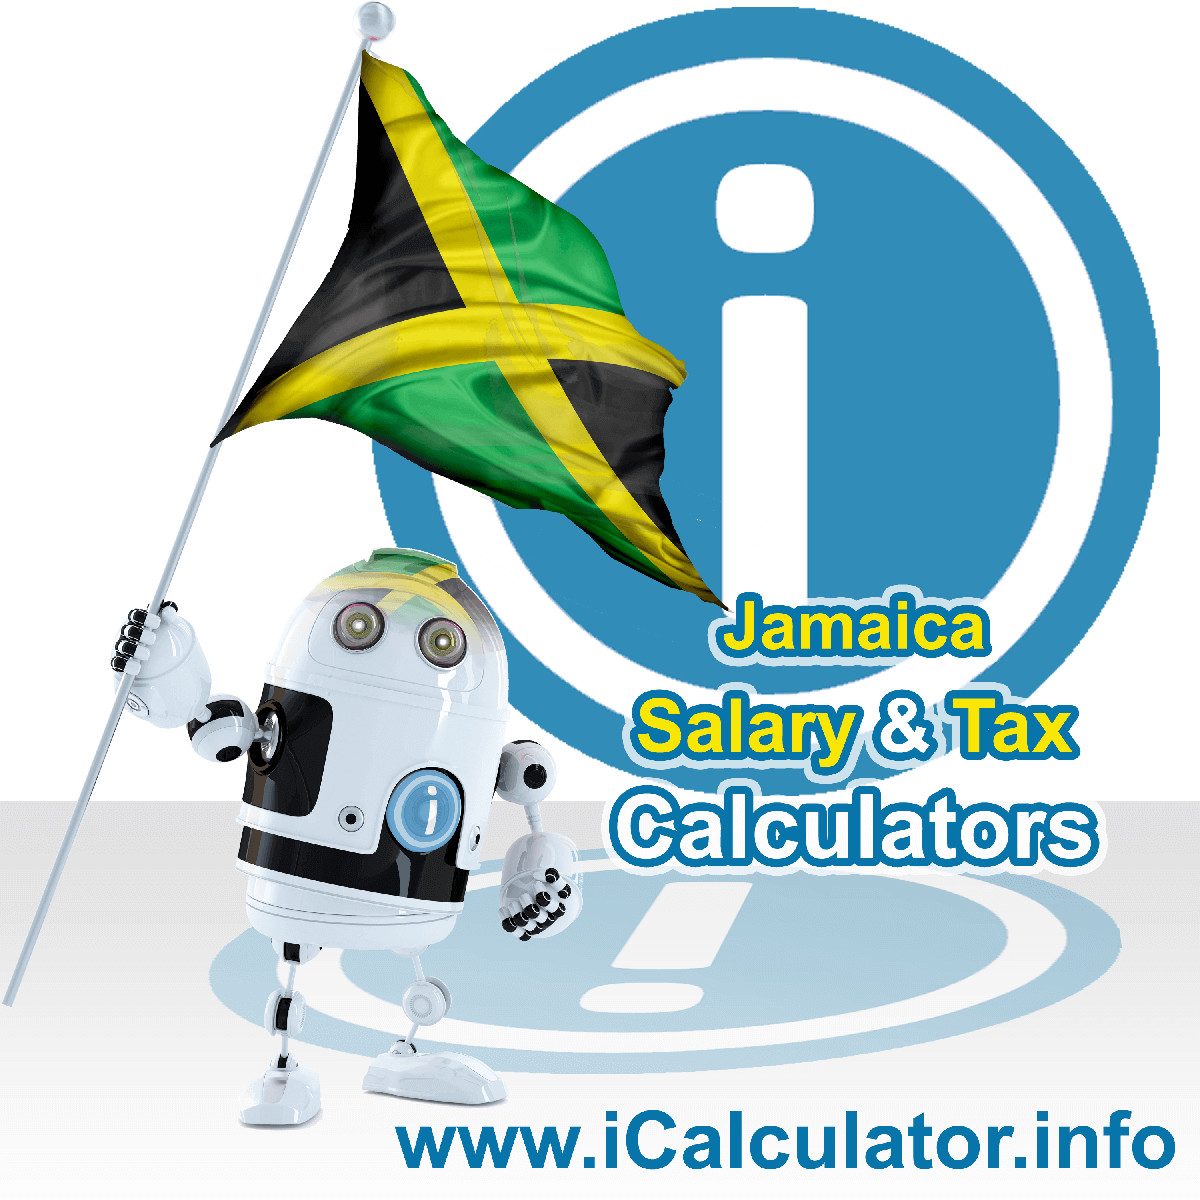 Jamaica Wage Calculator. This image shows the Jamaica flag and information relating to the tax formula for the Jamaica Tax Calculator